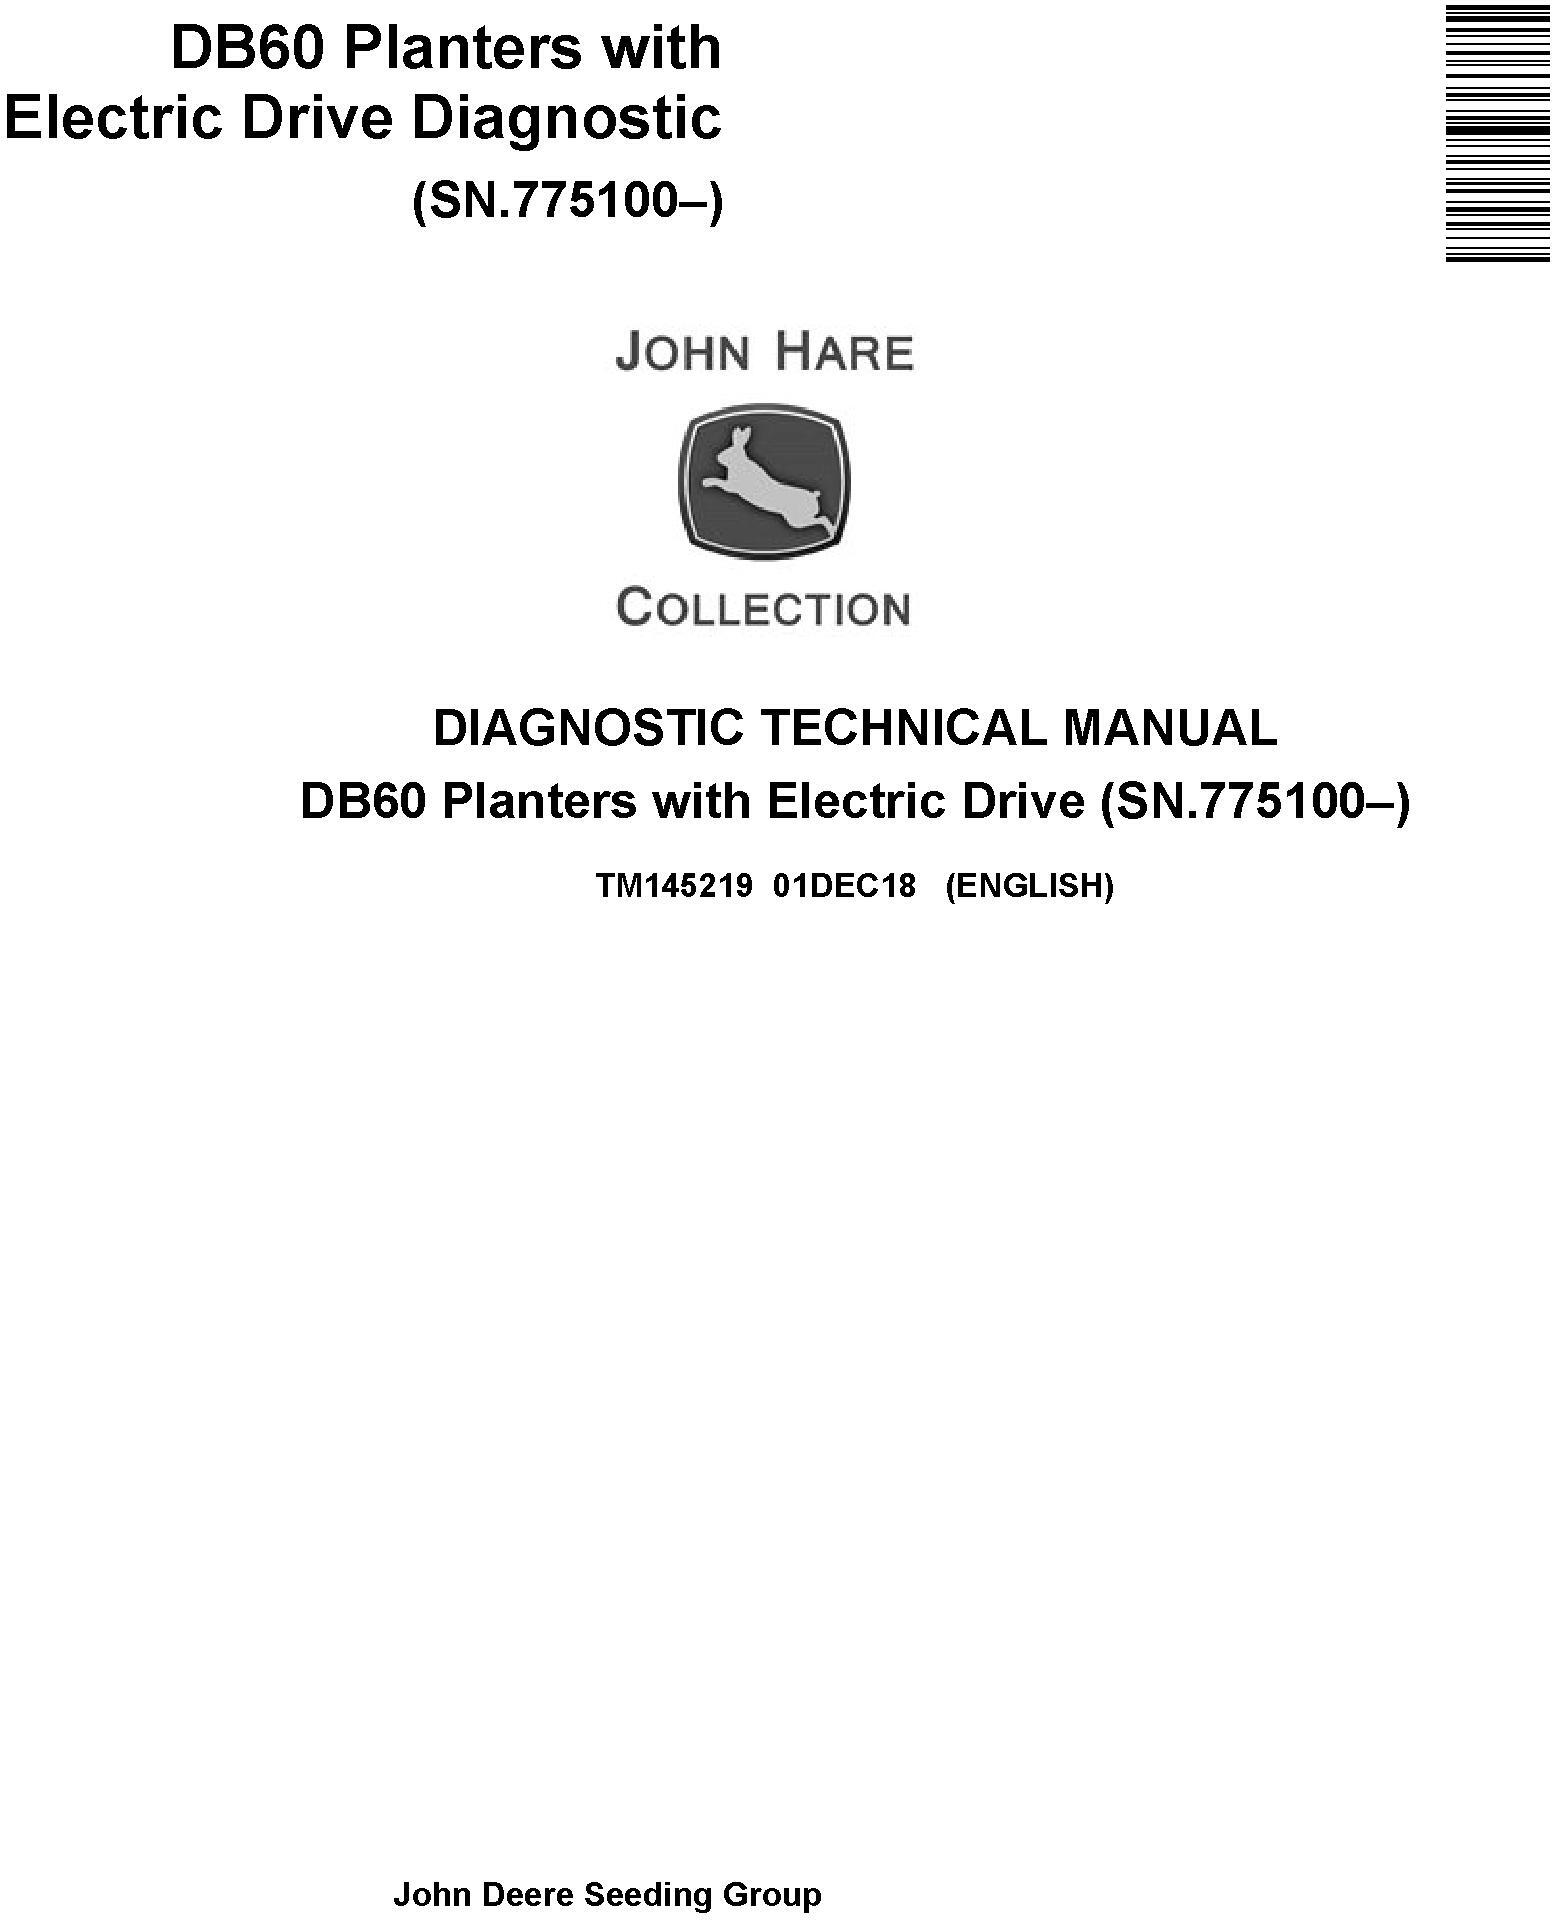 John Deere DB60 Planters with Electric Drive Diagnostic (SN.775100-) Technical Manual (TM145219)